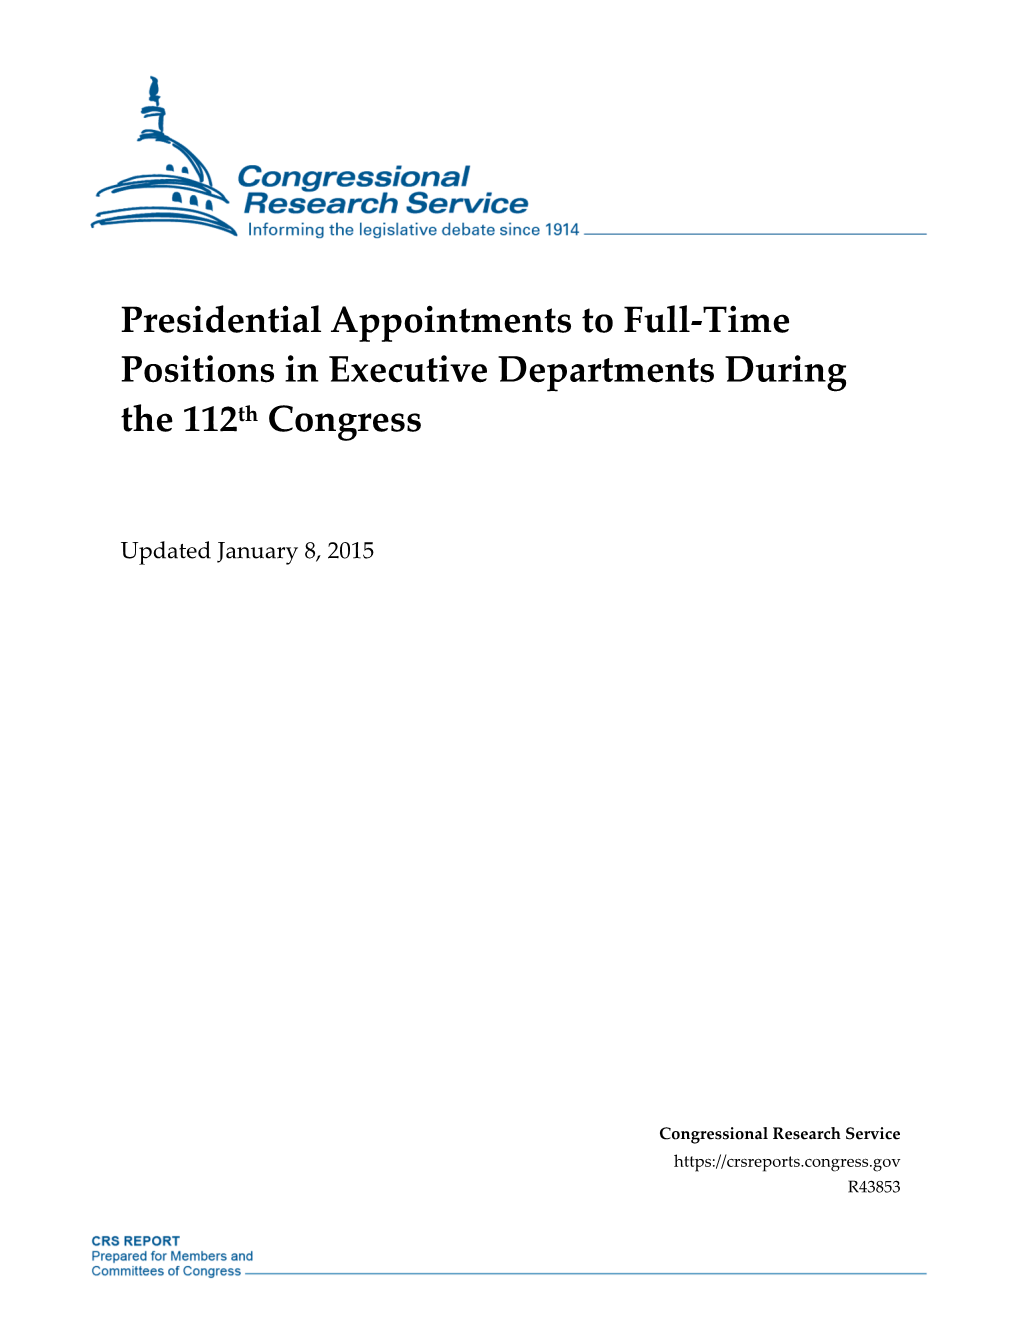 Presidential Appointments to Full-Time Positions in Executive Departments During the 112Th Congress